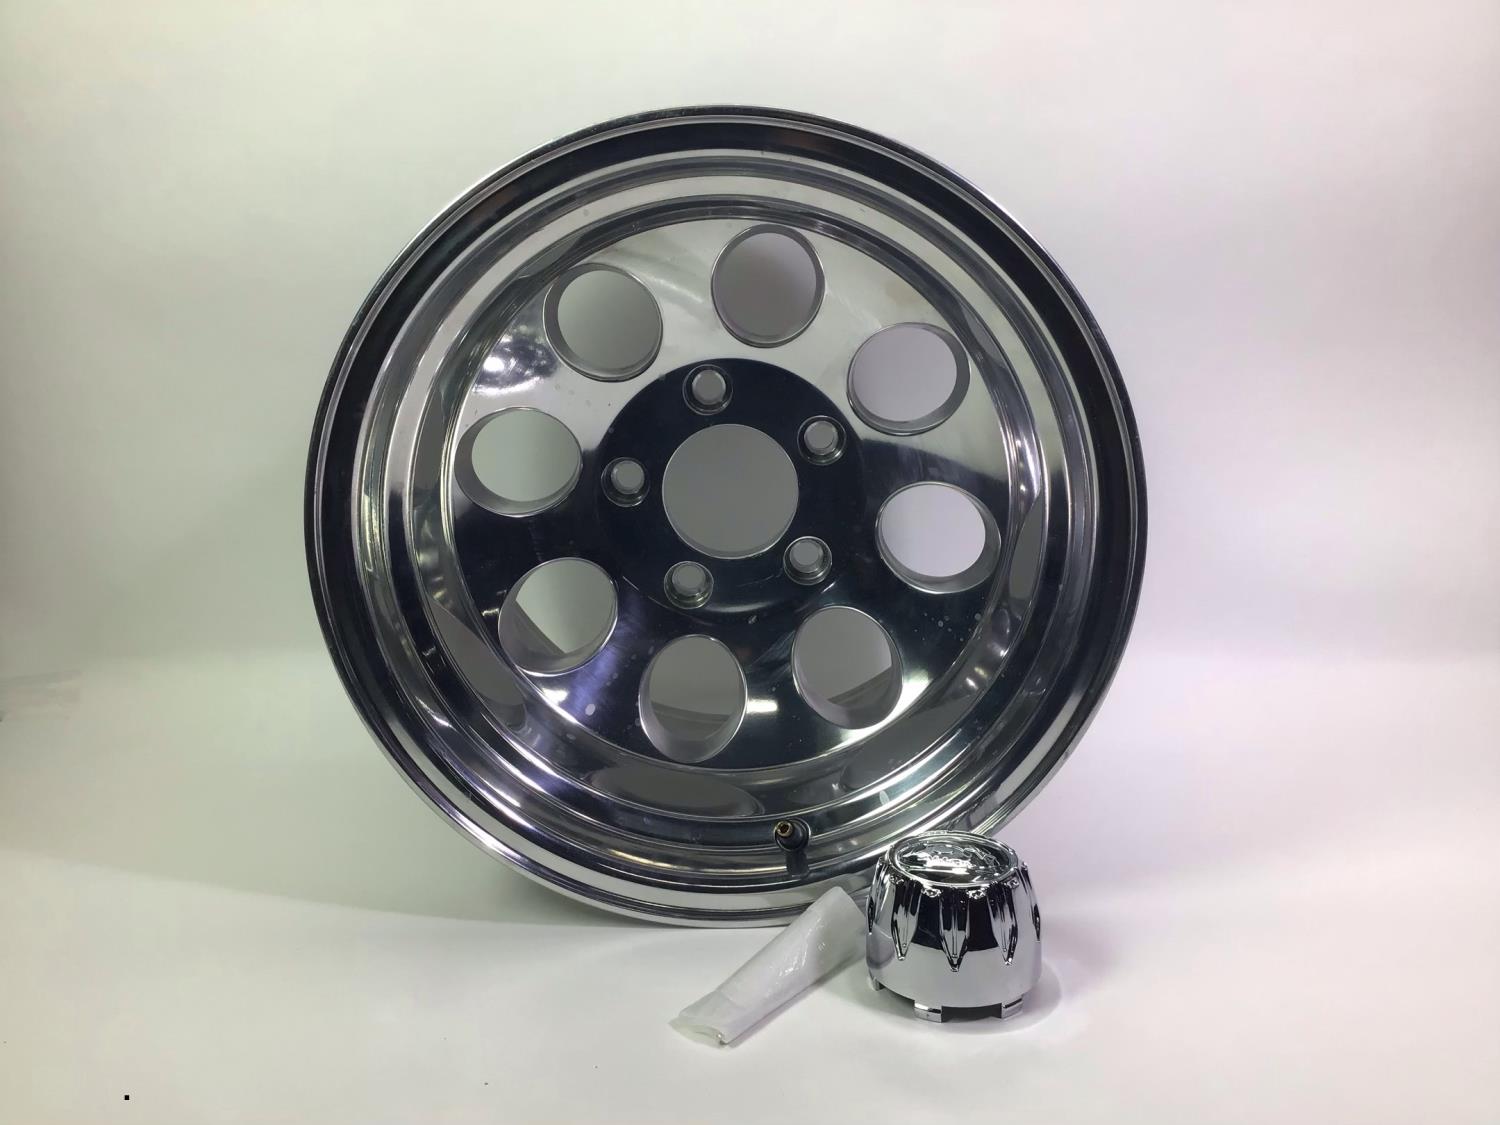 *BLEMISHED Ion 171 Series Wheel Size: 15" x 10"